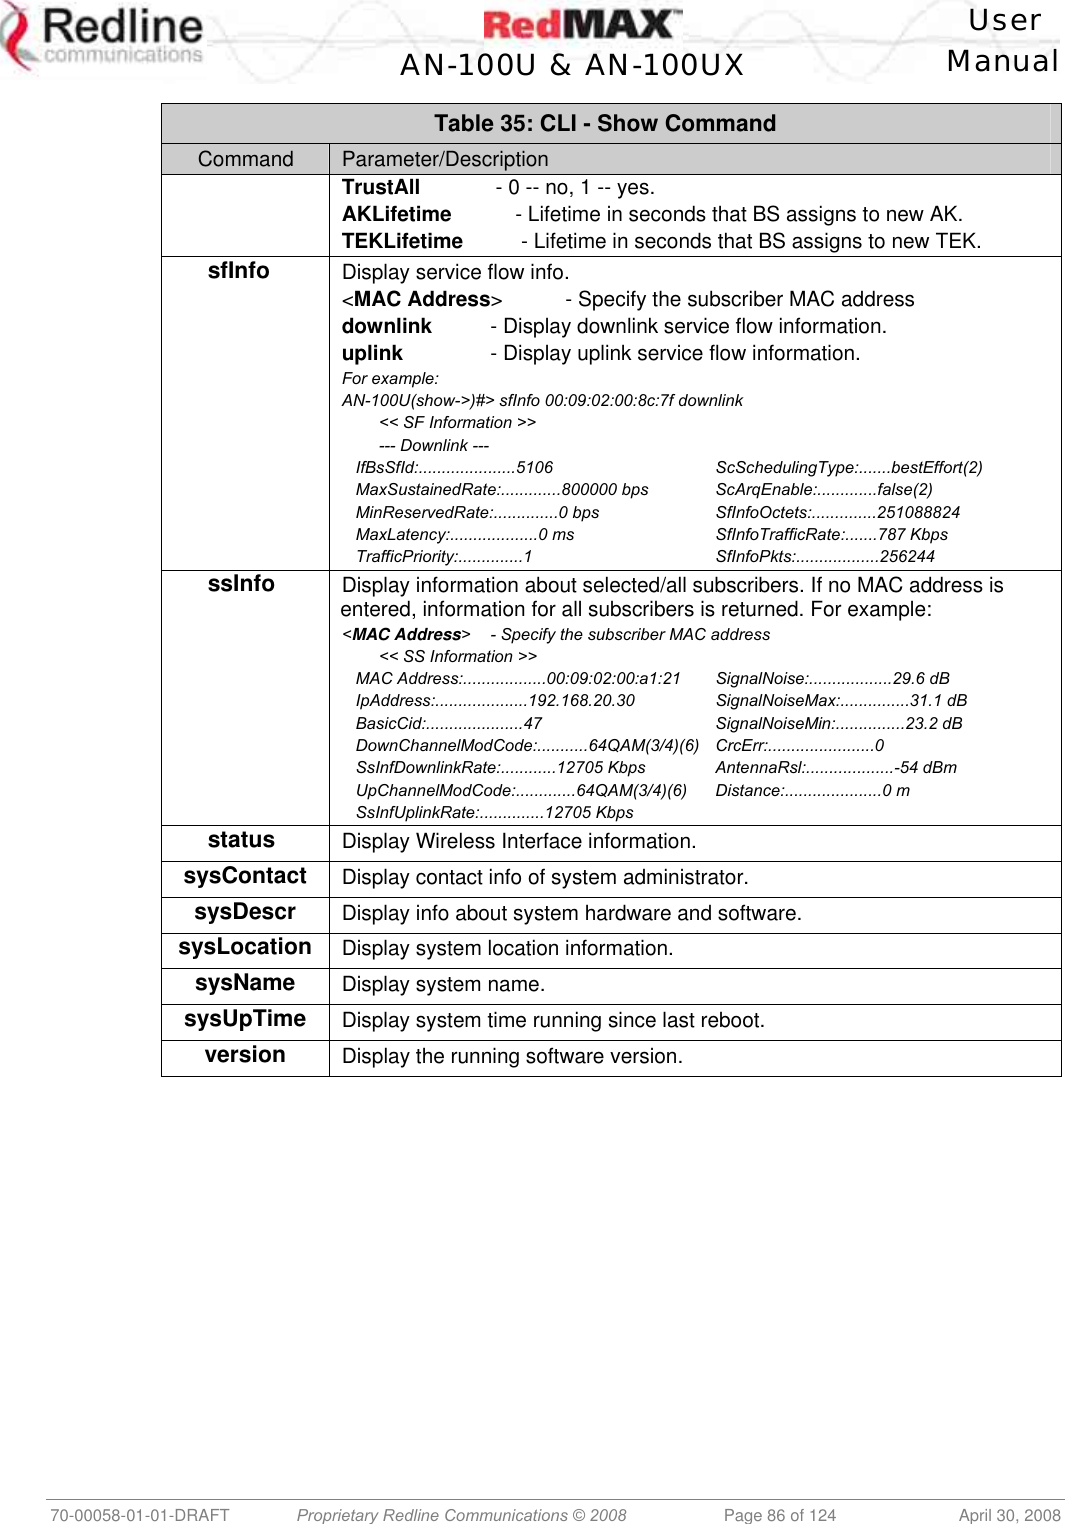    User  AN-100U &amp; AN-100UX Manual   70-00058-01-01-DRAFT  Proprietary Redline Communications © 2008   Page 86 of 124  April 30, 2008 Table 35: CLI - Show Command Command  Parameter/Description TrustAll             - 0 -- no, 1 -- yes. AKLifetime           - Lifetime in seconds that BS assigns to new AK. TEKLifetime          - Lifetime in seconds that BS assigns to new TEK. sfInfo  Display service flow info. &lt;MAC Address&gt;  - Specify the subscriber MAC address downlink  - Display downlink service flow information. uplink    - Display uplink service flow information. For example: AN-100U(show-&gt;)#&gt; sfInfo 00:09:02:00:8c:7f downlink         &lt;&lt; SF Information &gt;&gt;         --- Downlink ---    IfBsSfId:.....................5106      ScSchedulingType:.......bestEffort(2)    MaxSustainedRate:.............800000 bps  ScArqEnable:.............false(2)    MinReservedRate:..............0 bps    SfInfoOctets:..............251088824    MaxLatency:...................0 ms    SfInfoTrafficRate:.......787 Kbps    TrafficPriority:..............1      SfInfoPkts:..................256244 ssInfo  Display information about selected/all subscribers. If no MAC address is entered, information for all subscribers is returned. For example: &lt;MAC Address&gt;  - Specify the subscriber MAC address          &lt;&lt; SS Information &gt;&gt;    MAC Address:..................00:09:02:00:a1:21  SignalNoise:..................29.6 dB    IpAddress:....................192.168.20.30   SignalNoiseMax:...............31.1 dB    BasicCid:.....................47      SignalNoiseMin:...............23.2 dB    DownChannelModCode:...........64QAM(3/4)(6)  CrcErr:.......................0    SsInfDownlinkRate:............12705 Kbps  AntennaRsl:...................-54 dBm    UpChannelModCode:.............64QAM(3/4)(6)  Distance:.....................0 m    SsInfUplinkRate:..............12705 Kbps status  Display Wireless Interface information. sysContact  Display contact info of system administrator. sysDescr  Display info about system hardware and software. sysLocation  Display system location information. sysName  Display system name. sysUpTime  Display system time running since last reboot. version  Display the running software version.  